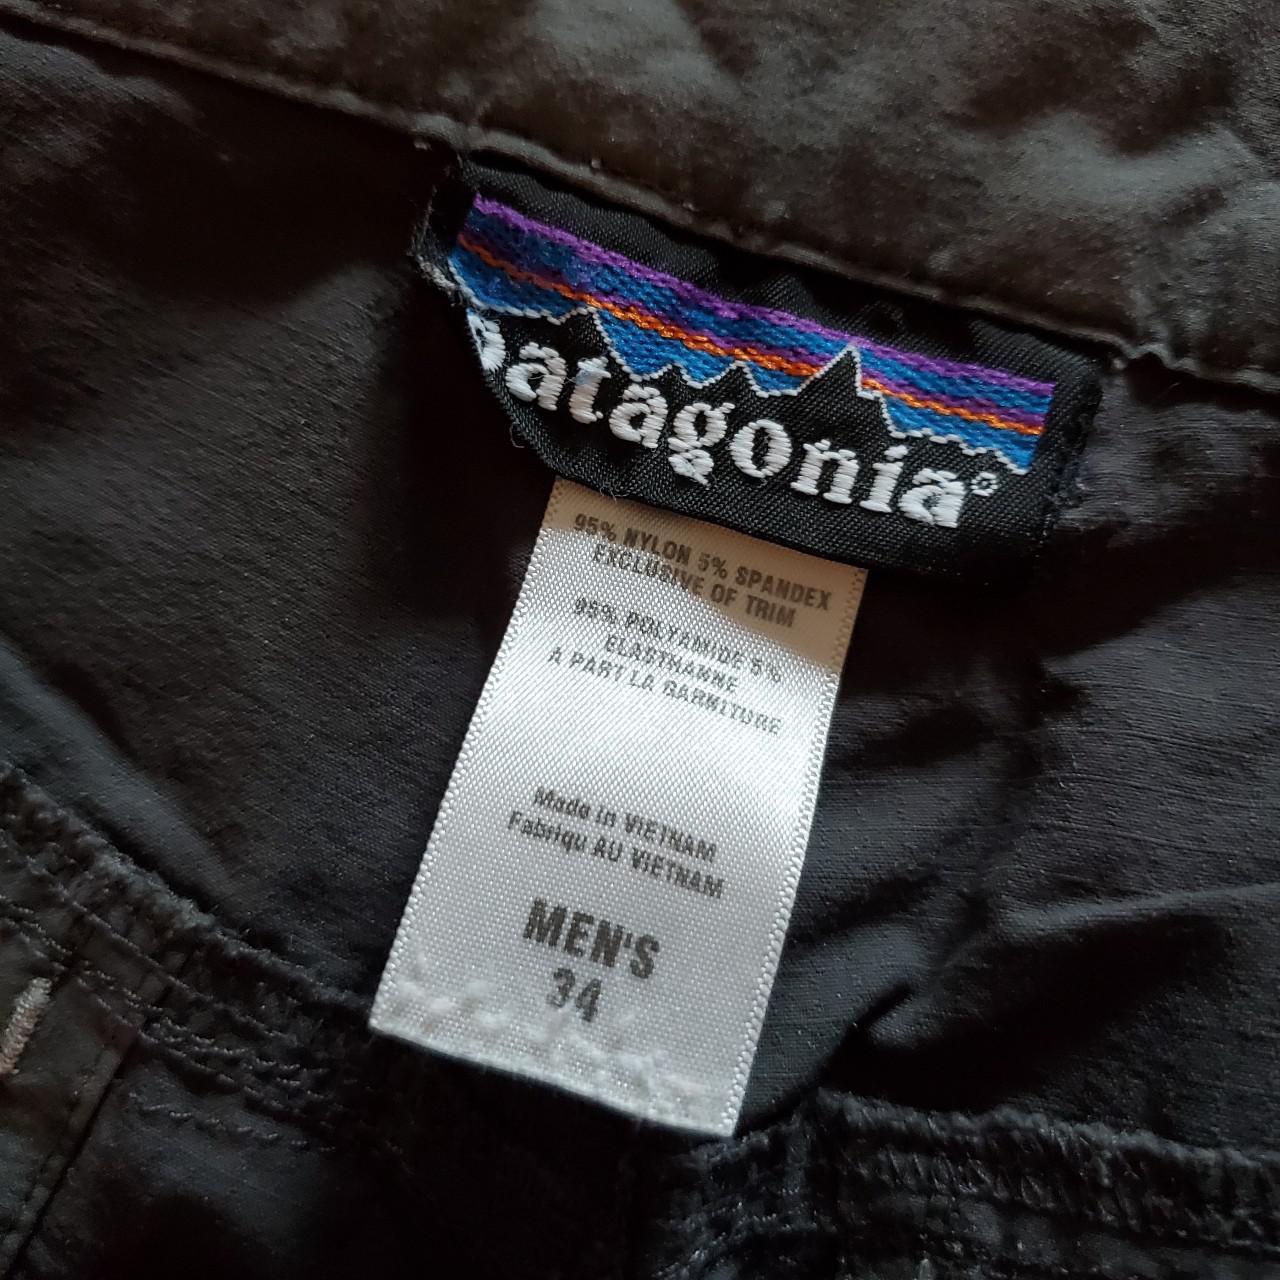 Mid 2000s Patagonia detachable hiking pants with... - Depop